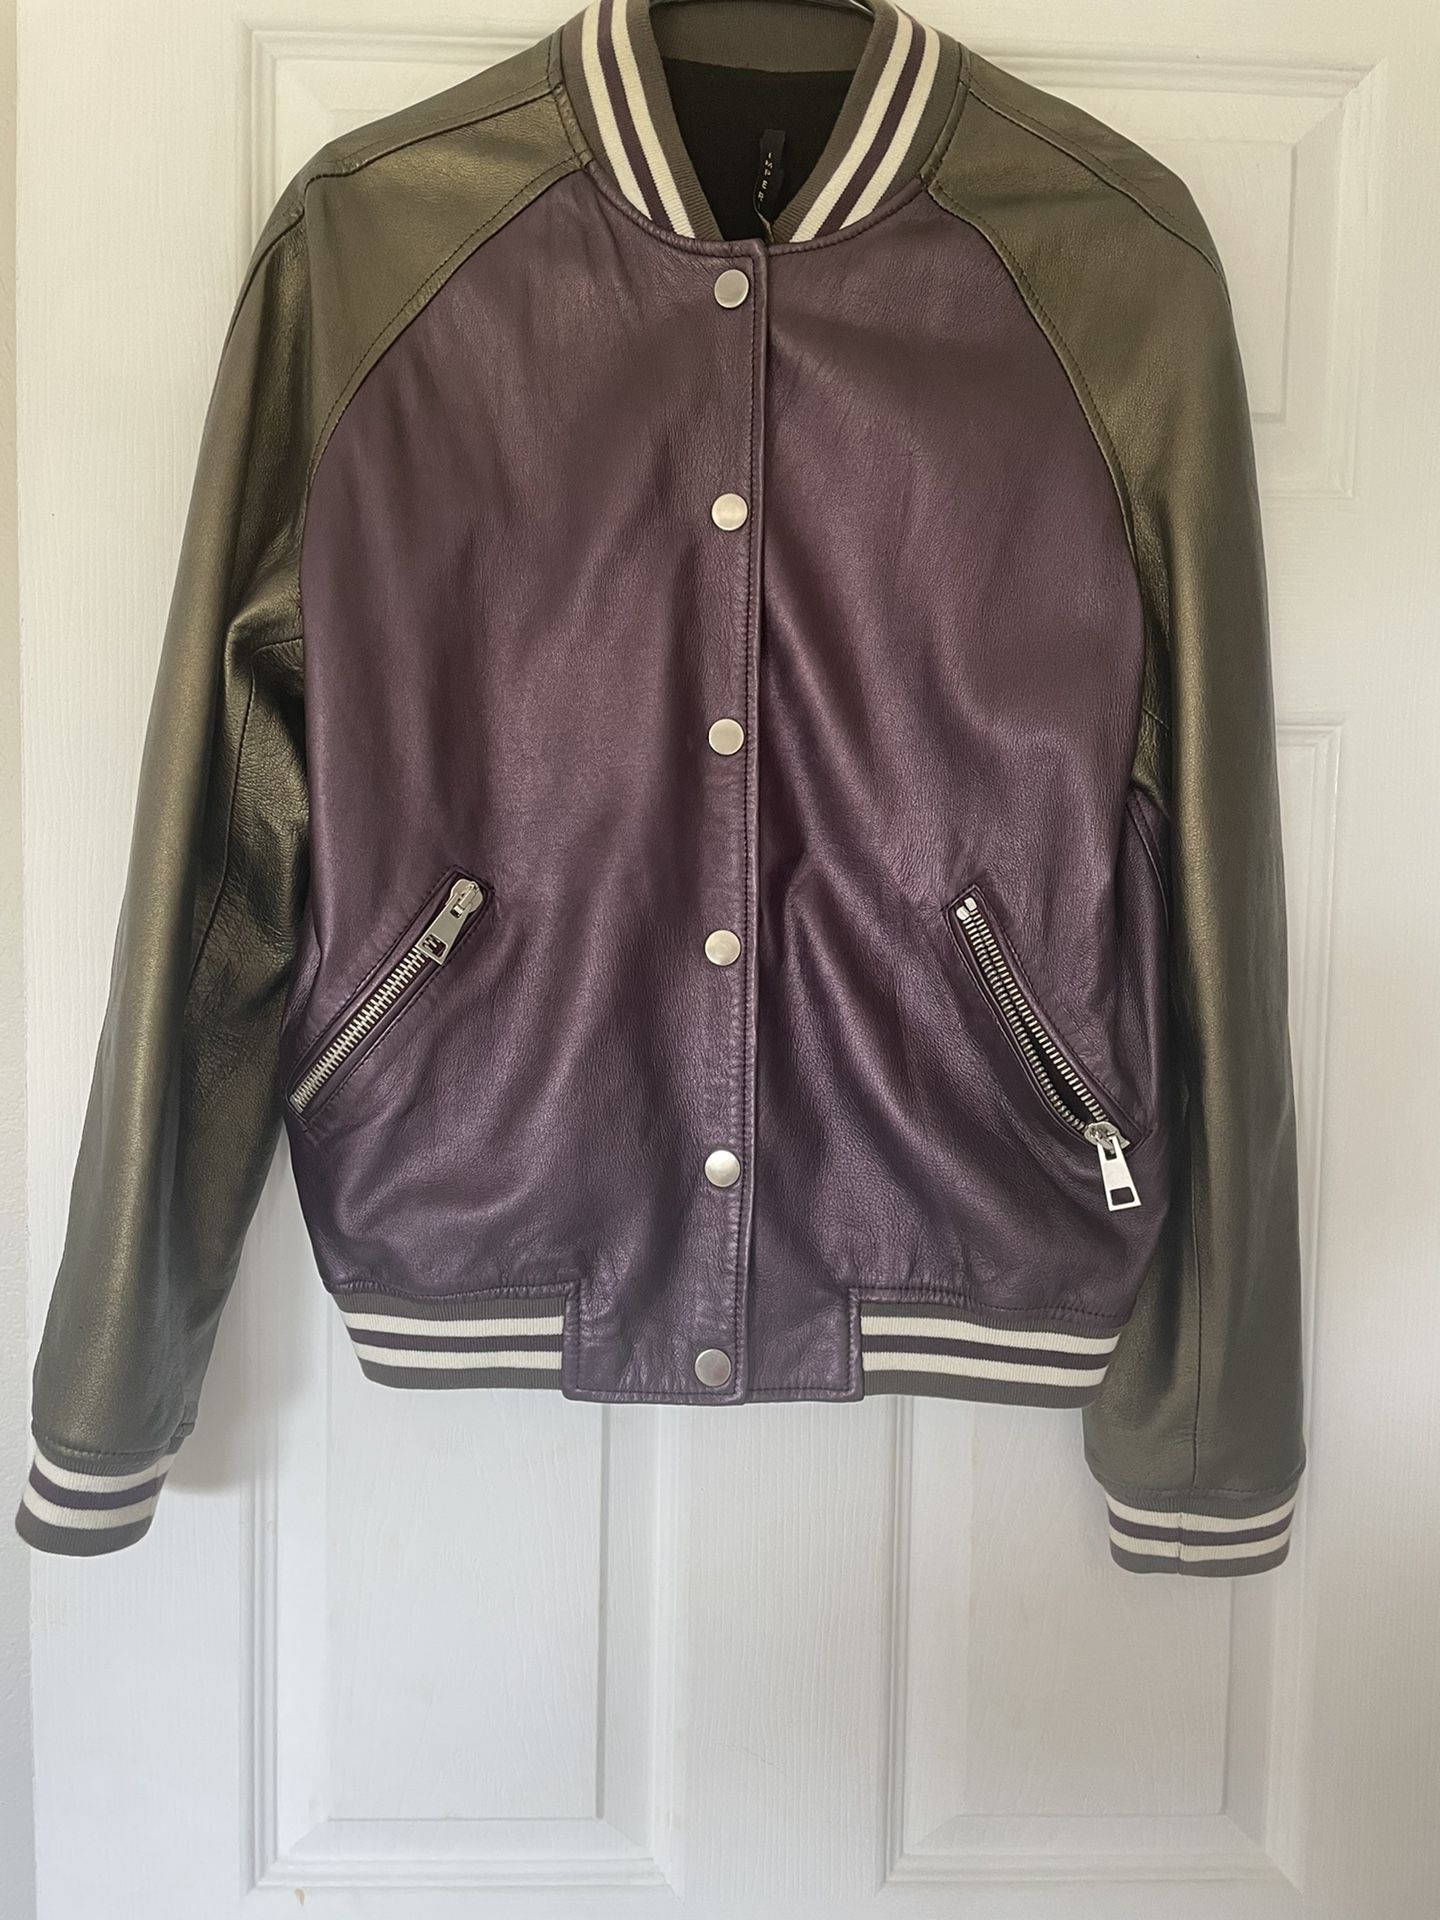 Leather Jacket , Women’s’ , Size M-L. Worn Once, Perfect Condition